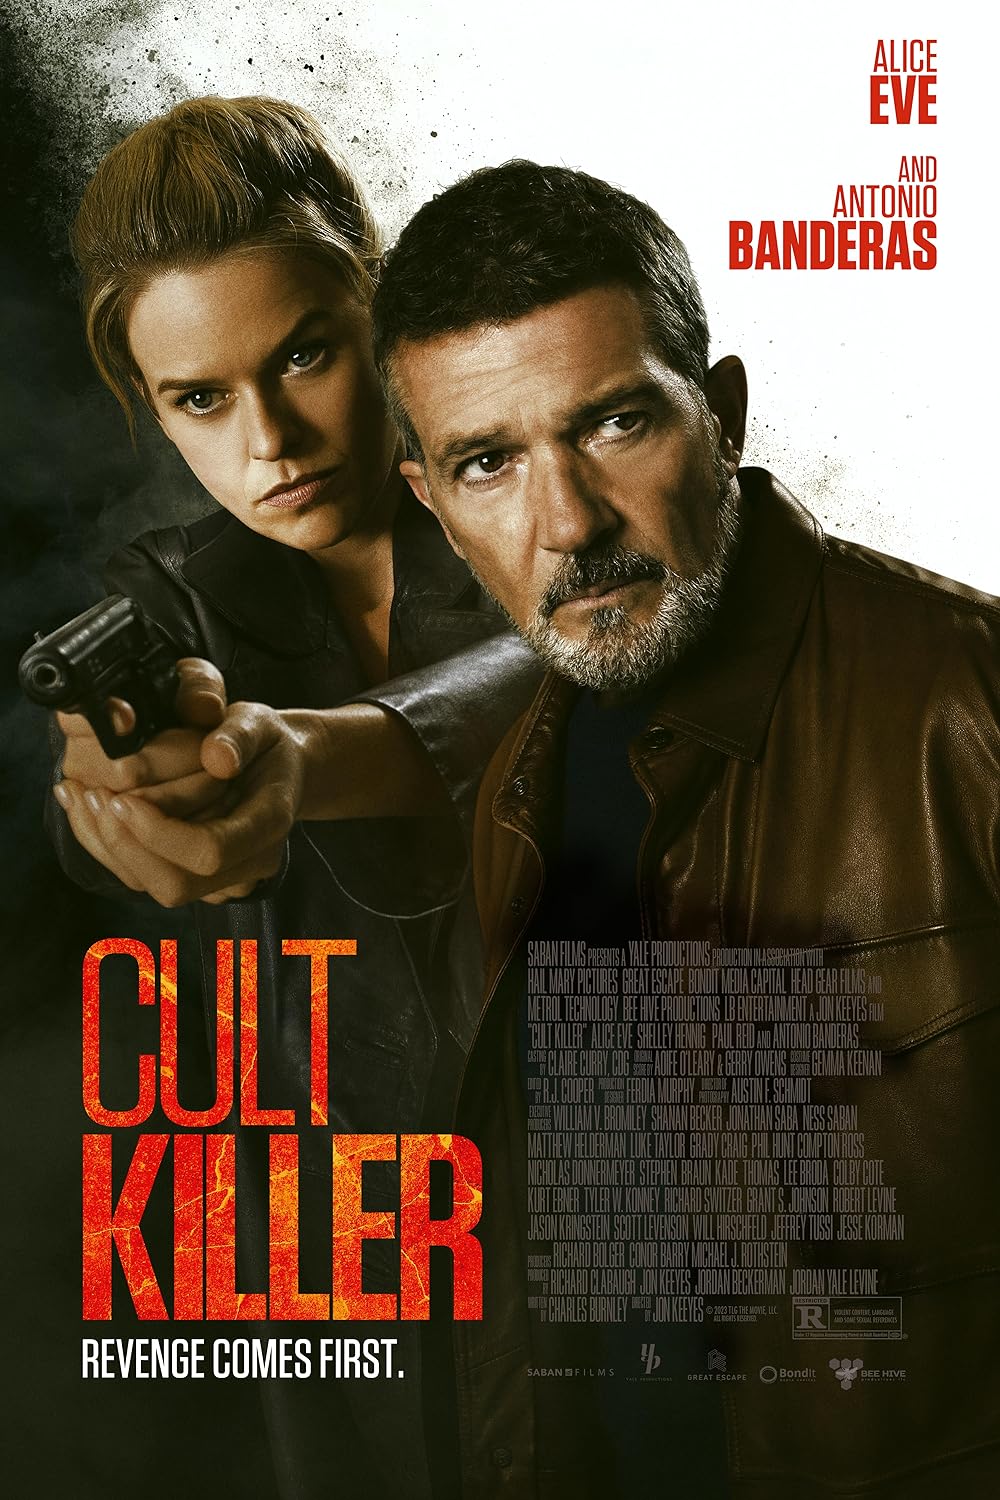 Cult Killer Movie Review